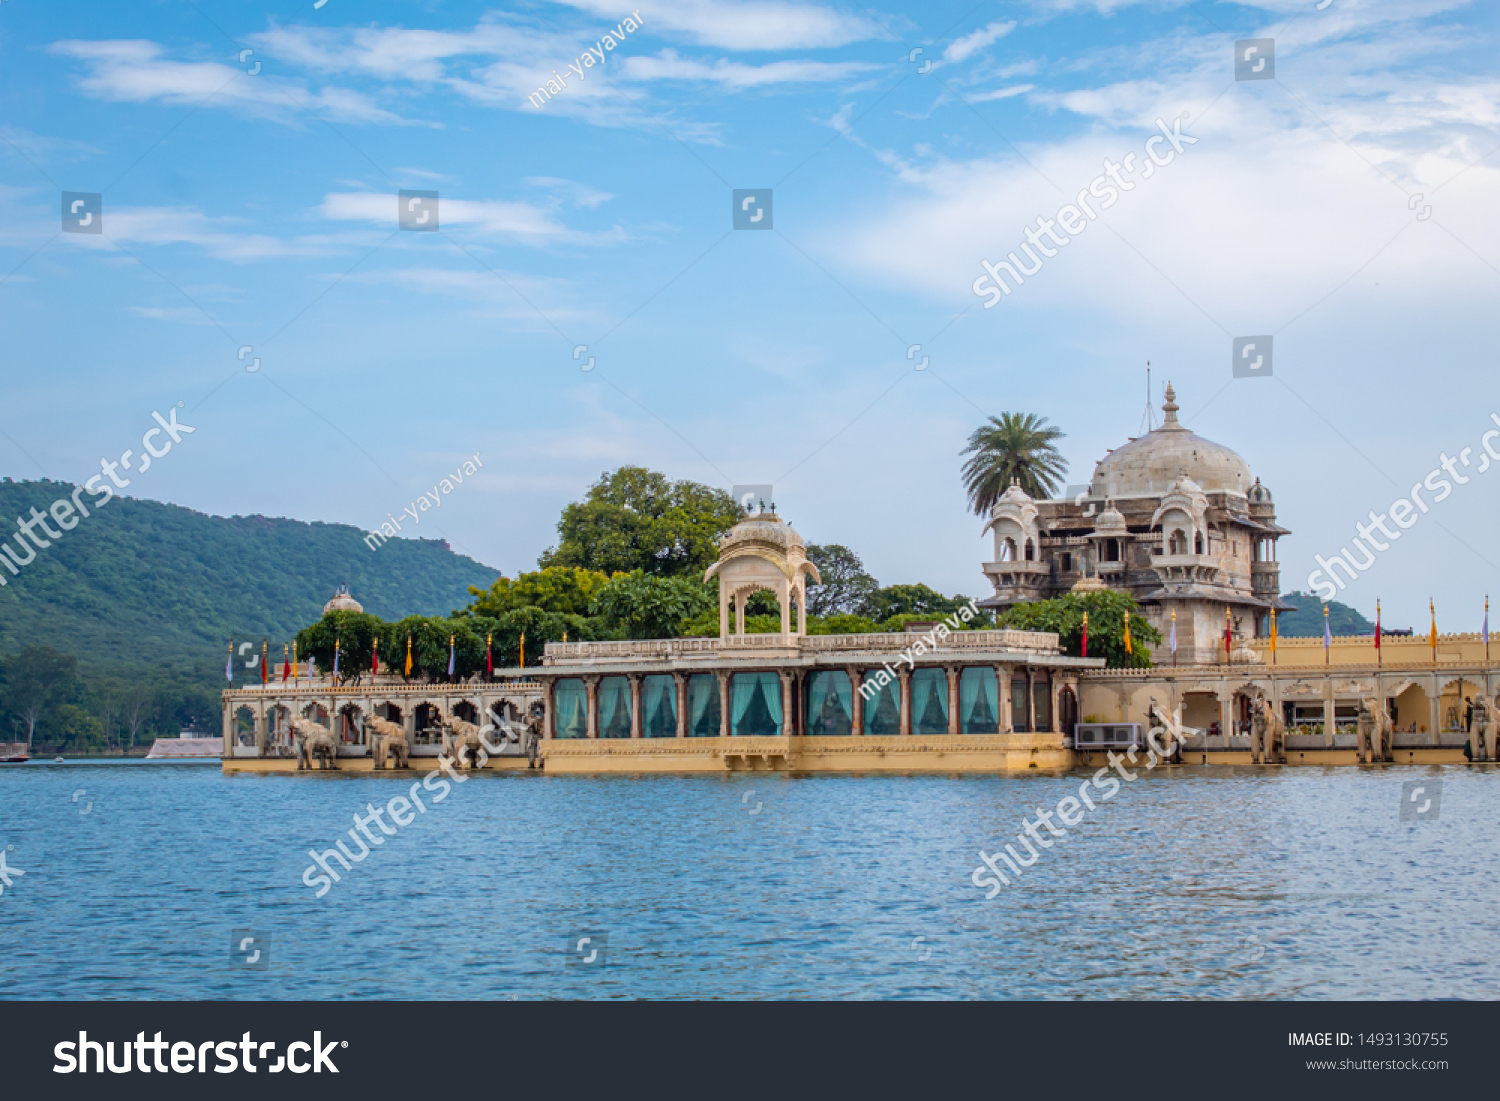 Jag Mandir is a palace built on an island in the Lake Pichola. The palace is located in Udaipur city in the Indian state of 
Rajasthan #1493130755